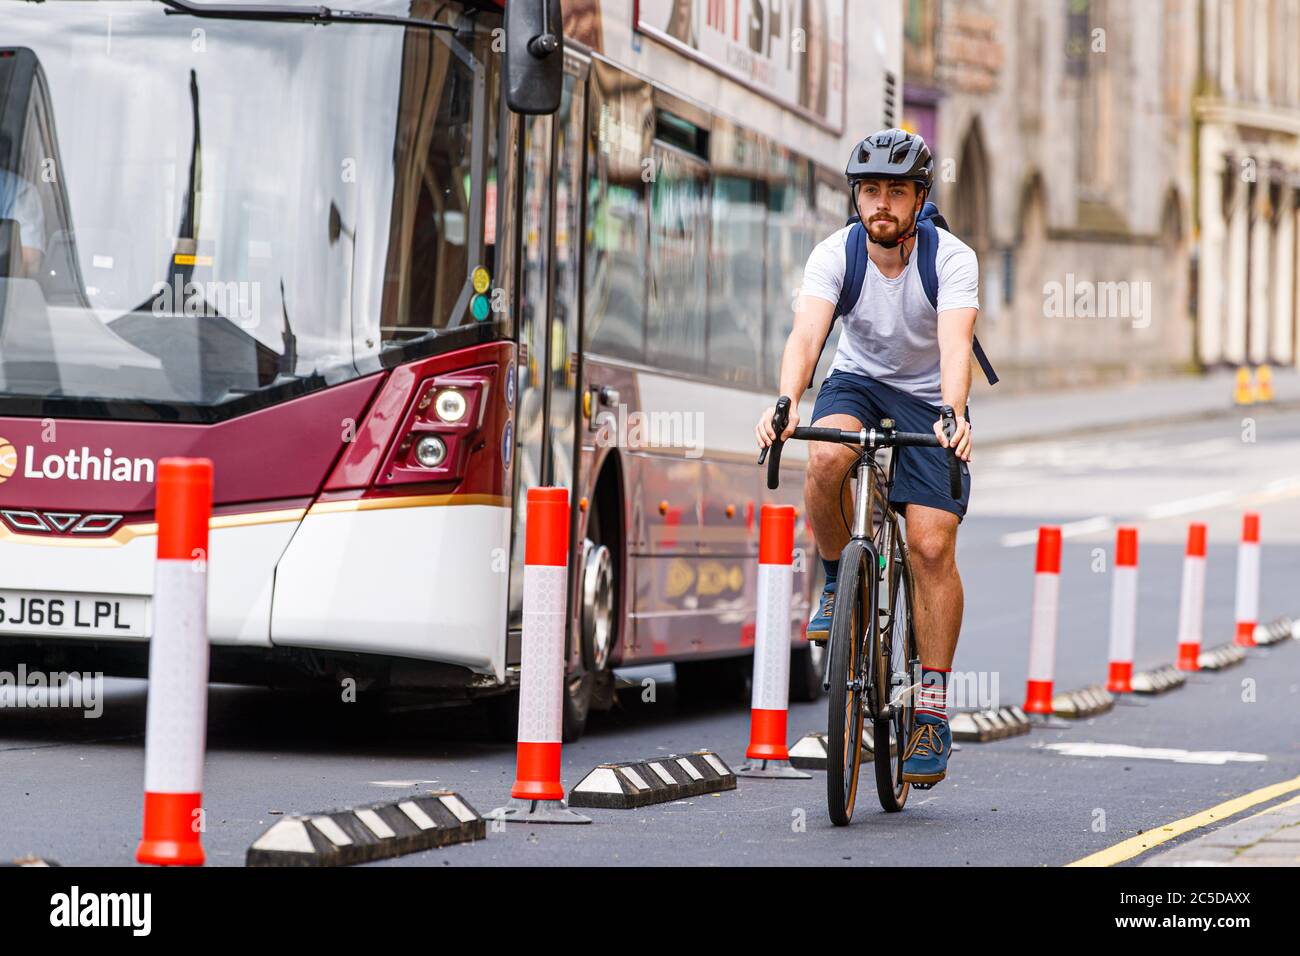 Edinburgh, Scotland, UK. 2 July, 2020. A cyclist takes advantage of a new temporary segregated cycle lane installed by Edinburgh City Council as part of a wider programme of active travel and social distancing measures, backed by the Scottish Governments' £10m 'Spaces for People' scheme. Andrew Perry/Alamy Live News Stock Photo